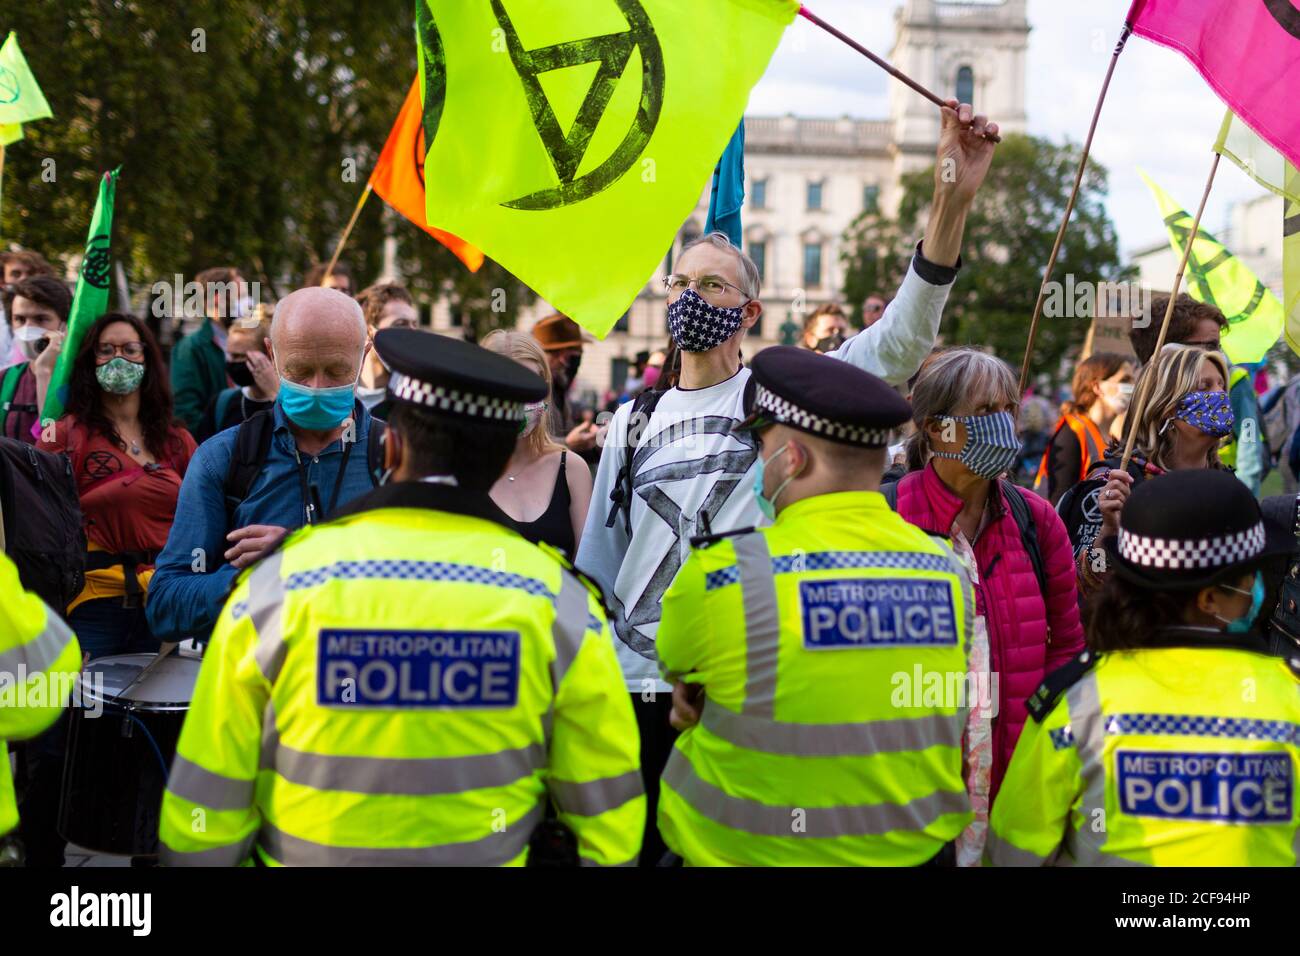 Protesters wave flags in front of police during Extinction Rebellion demonstration, Parliament Square, London, 1 September 2020 Stock Photo